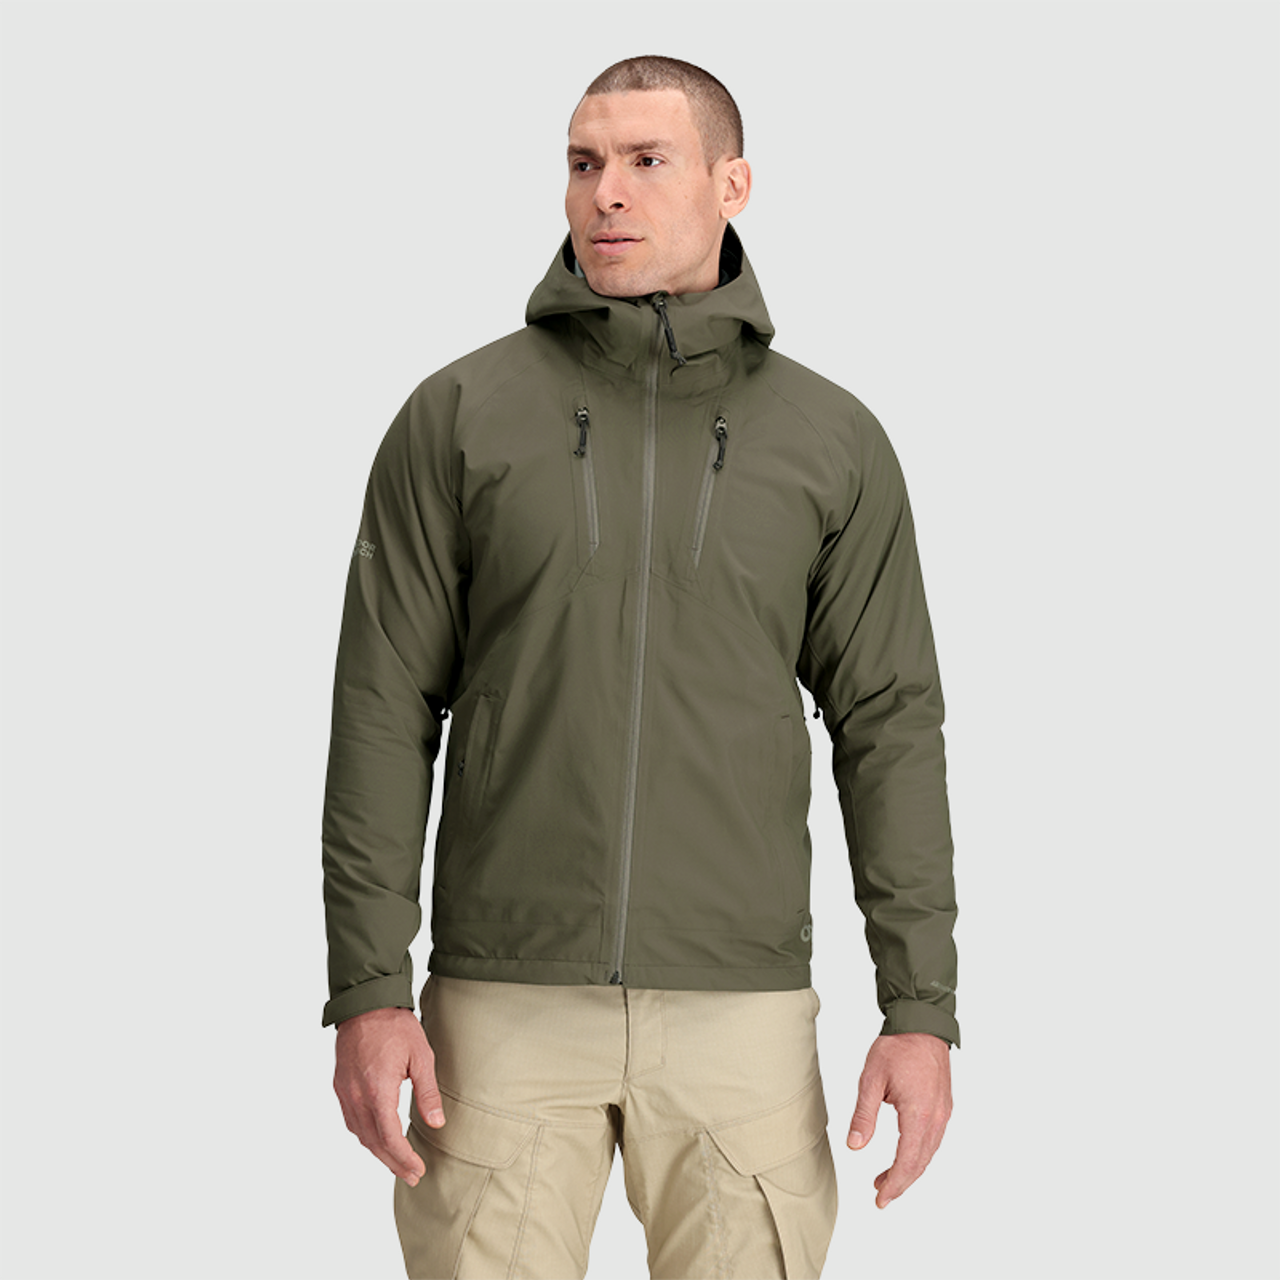 Outdoor Research Allies Mountain Pant 3 Layer Gore-tex